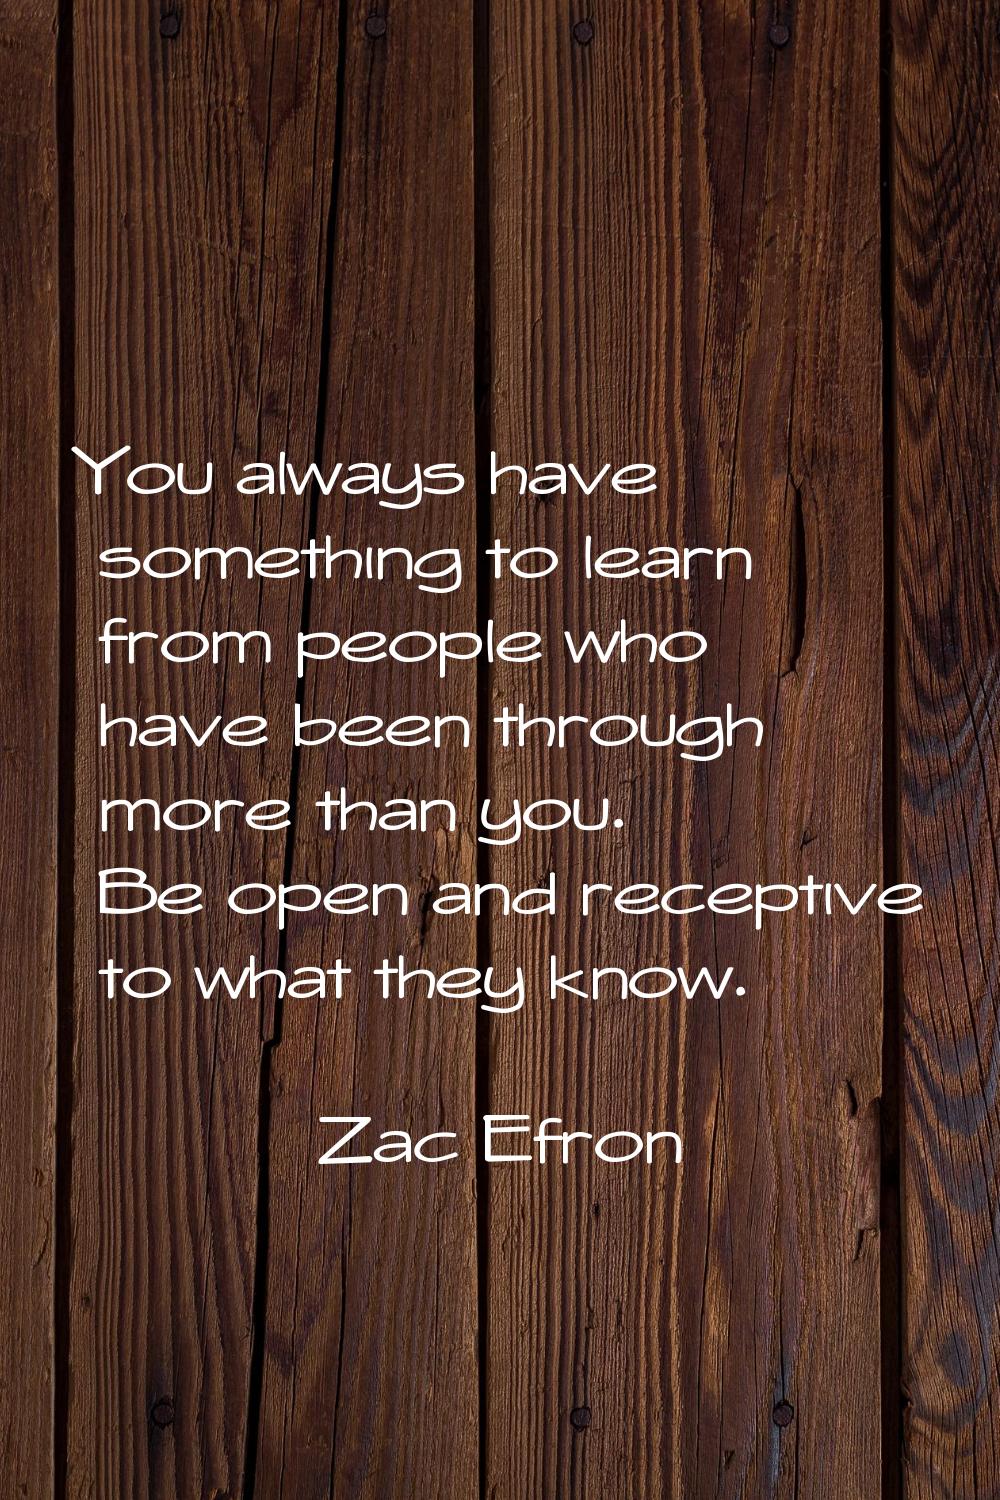 You always have something to learn from people who have been through more than you. Be open and rec